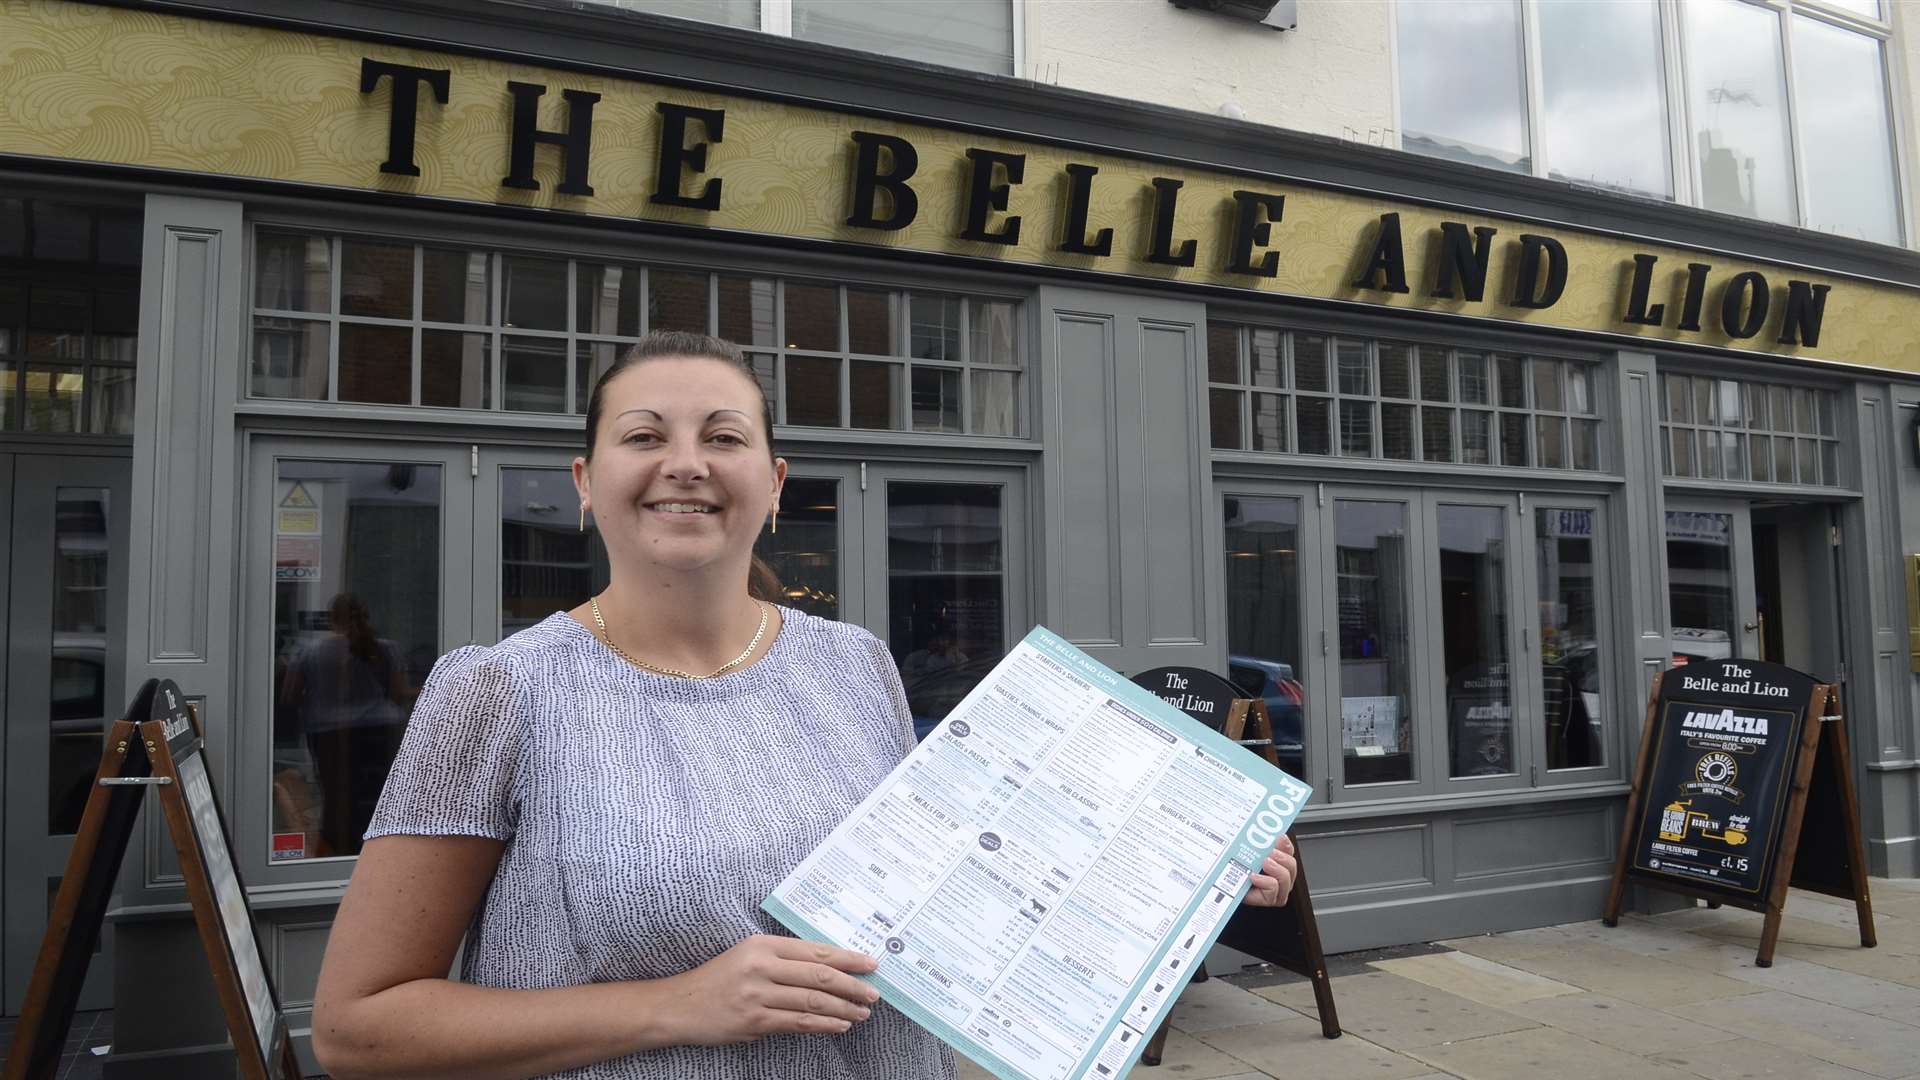 Kelly Smith, manager at the Belle and Lion in Sheerness